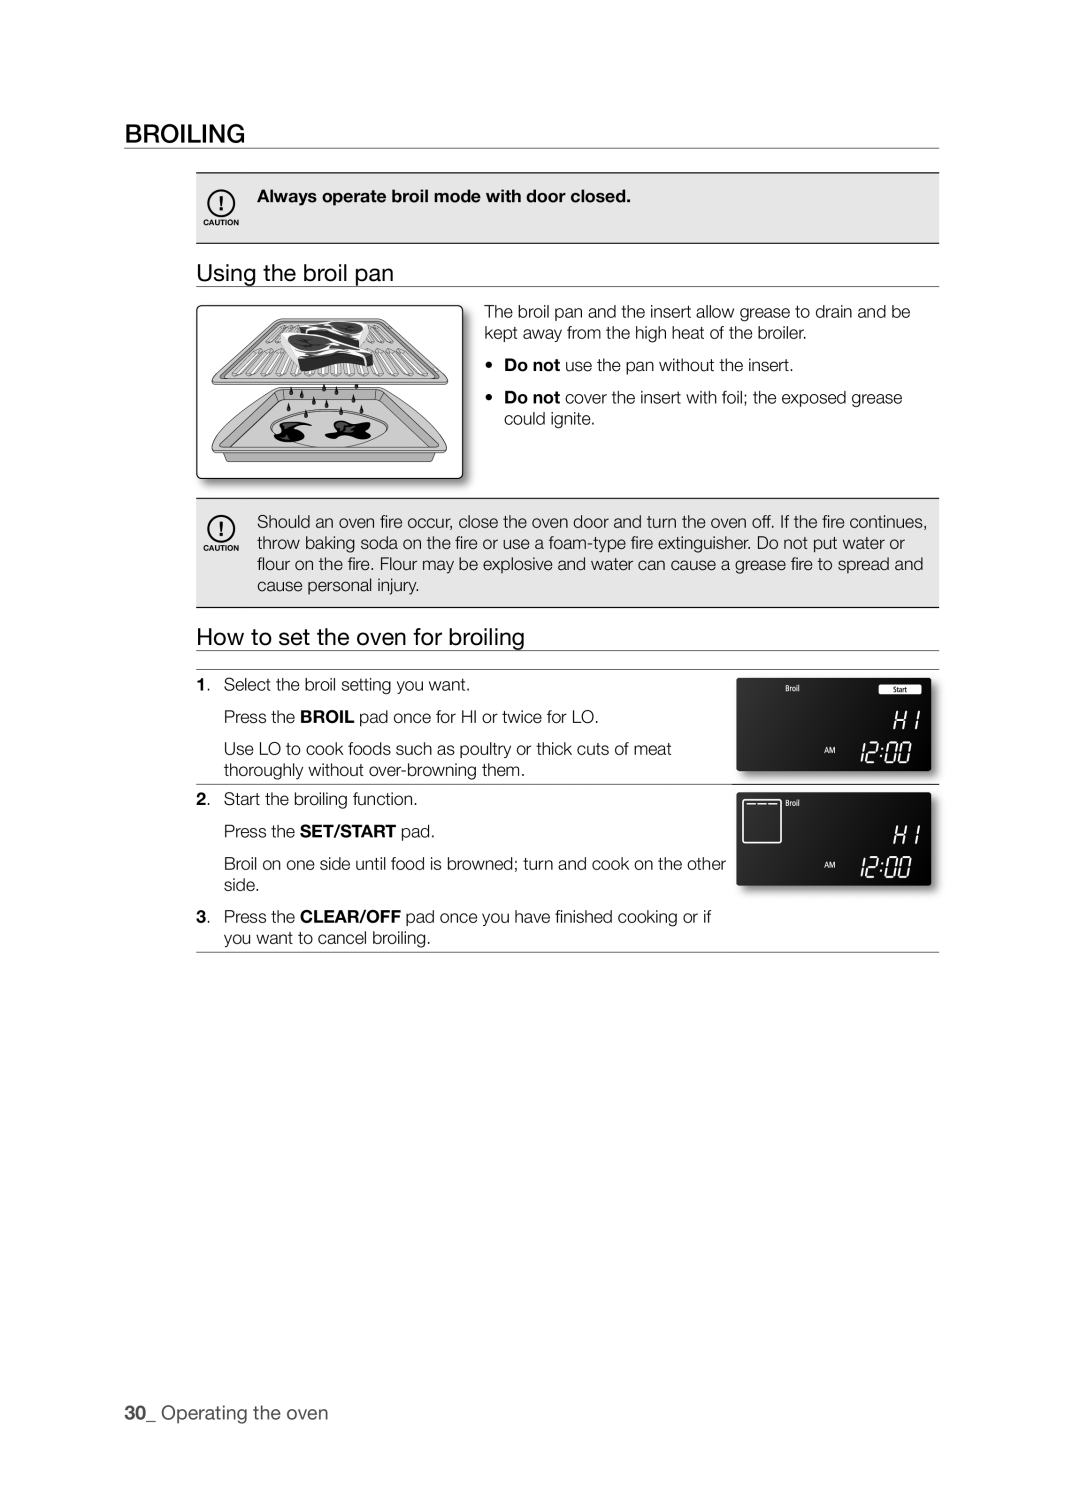 Samsung FTQ386LWX user manual Broiling, Using the broil pan, How to set the oven for broiling, 0_ Operating the oven 